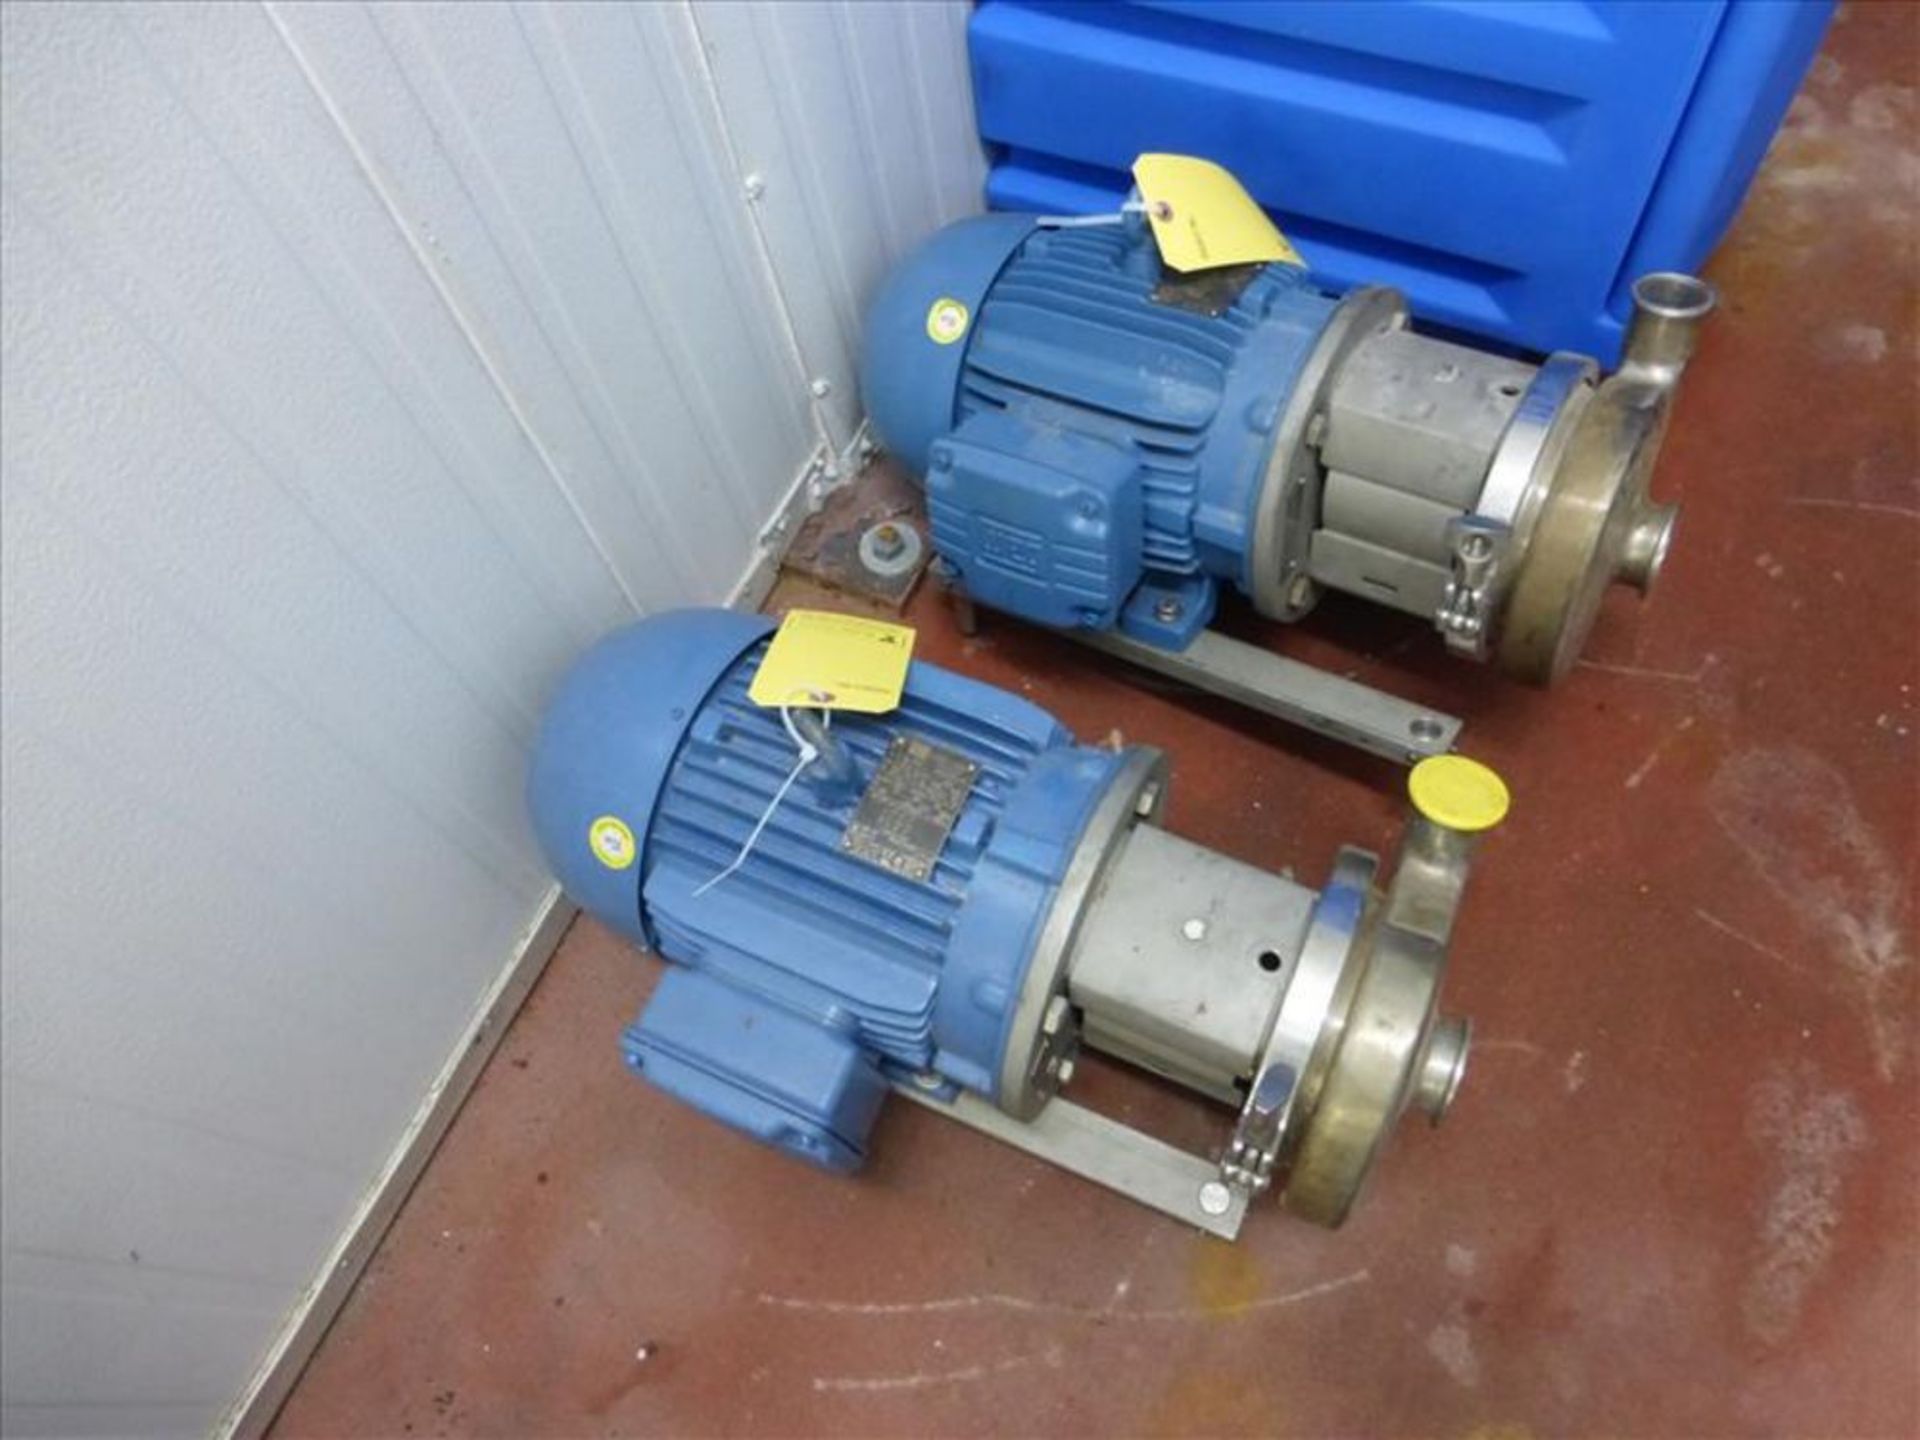 Ampco centrifugal pump mod. no. C216MD127-S ser. no. CC38502-1-2 stainless, 6 in. dia impeller, 7.